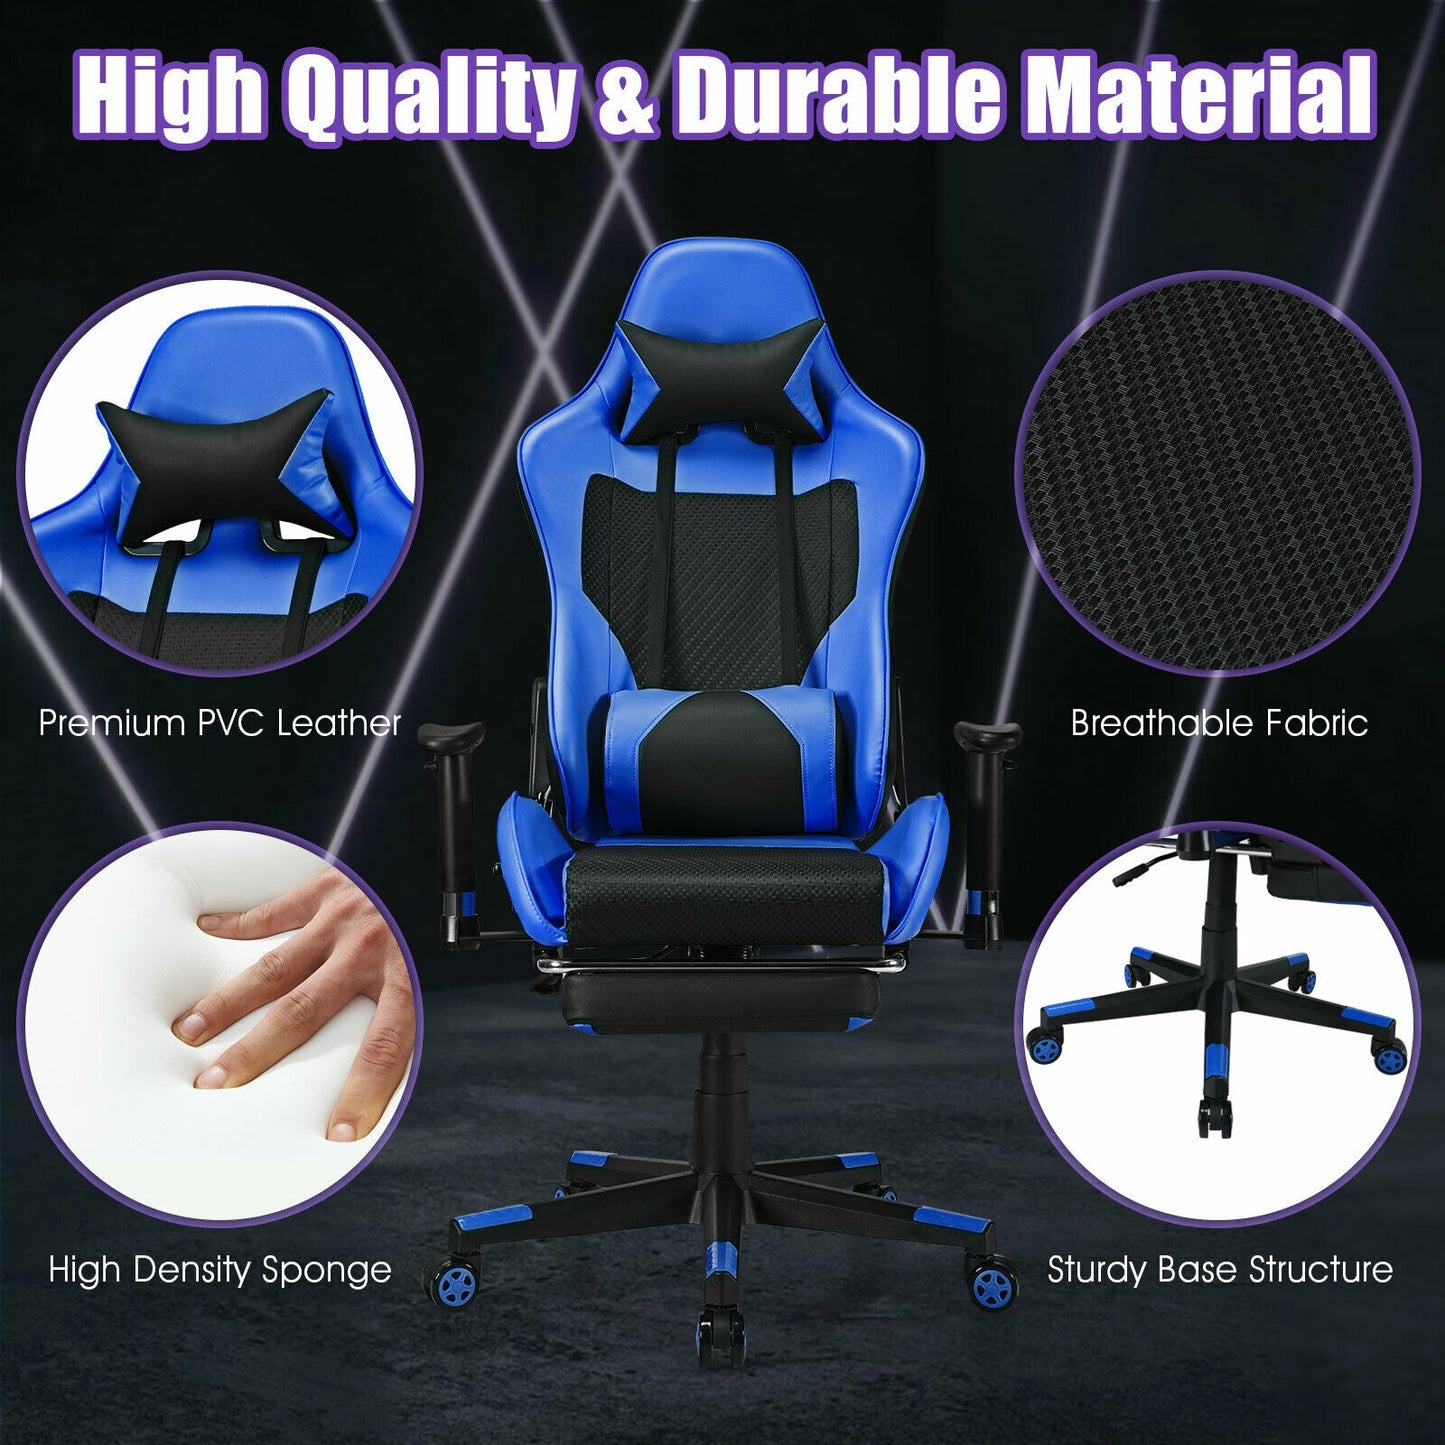 PU Leather Gaming Chair with USB Massage Lumbar Pillow and Footrest-Blue